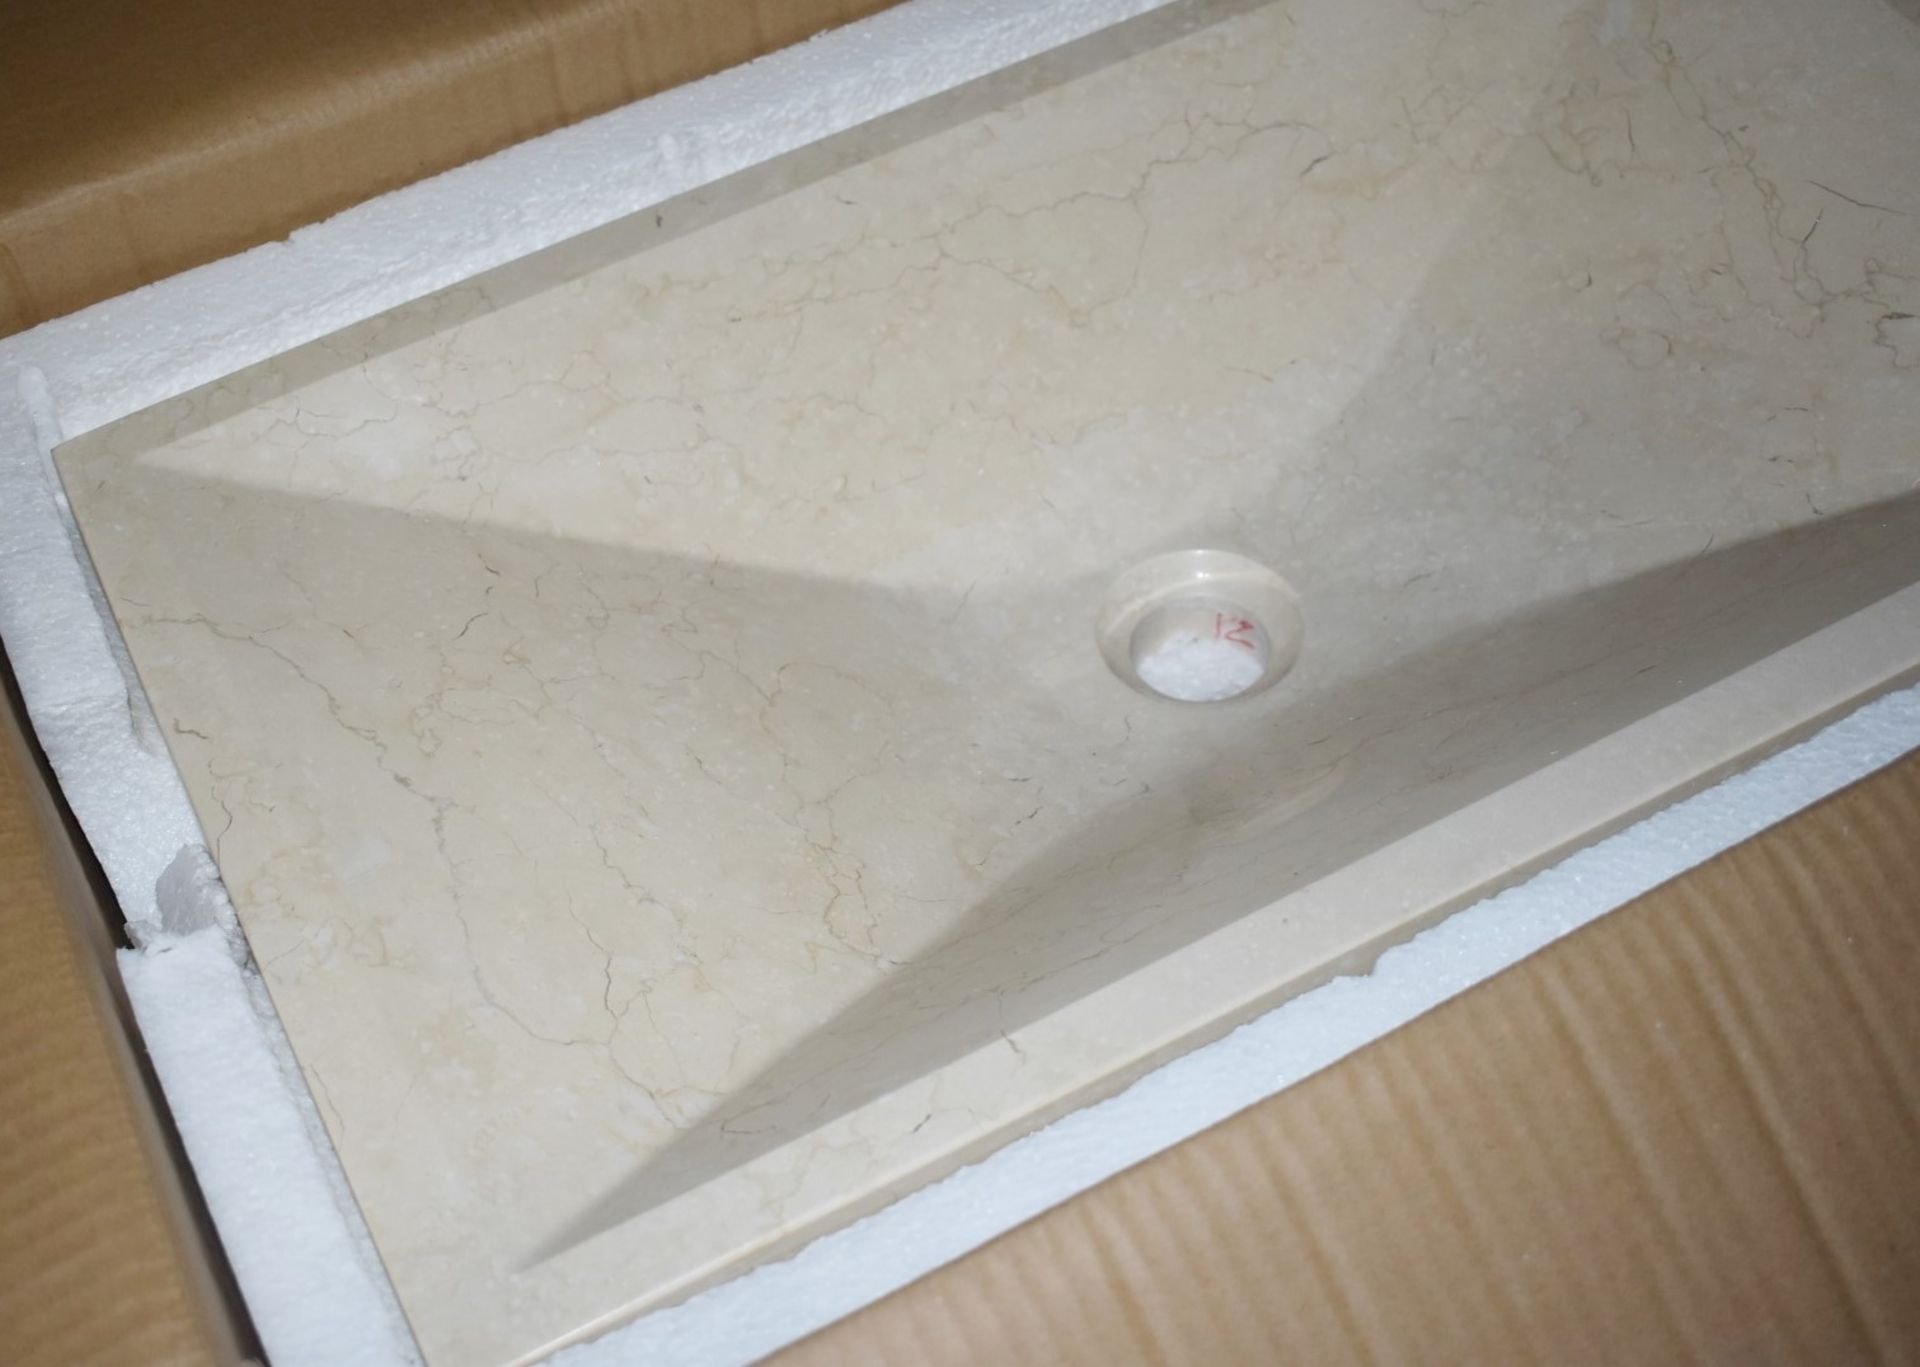 1 x Stonearth 'Karo' Solid Travertine Stone Countertop Sink Basin - New Boxed Stock - RRP £525 - Image 5 of 8